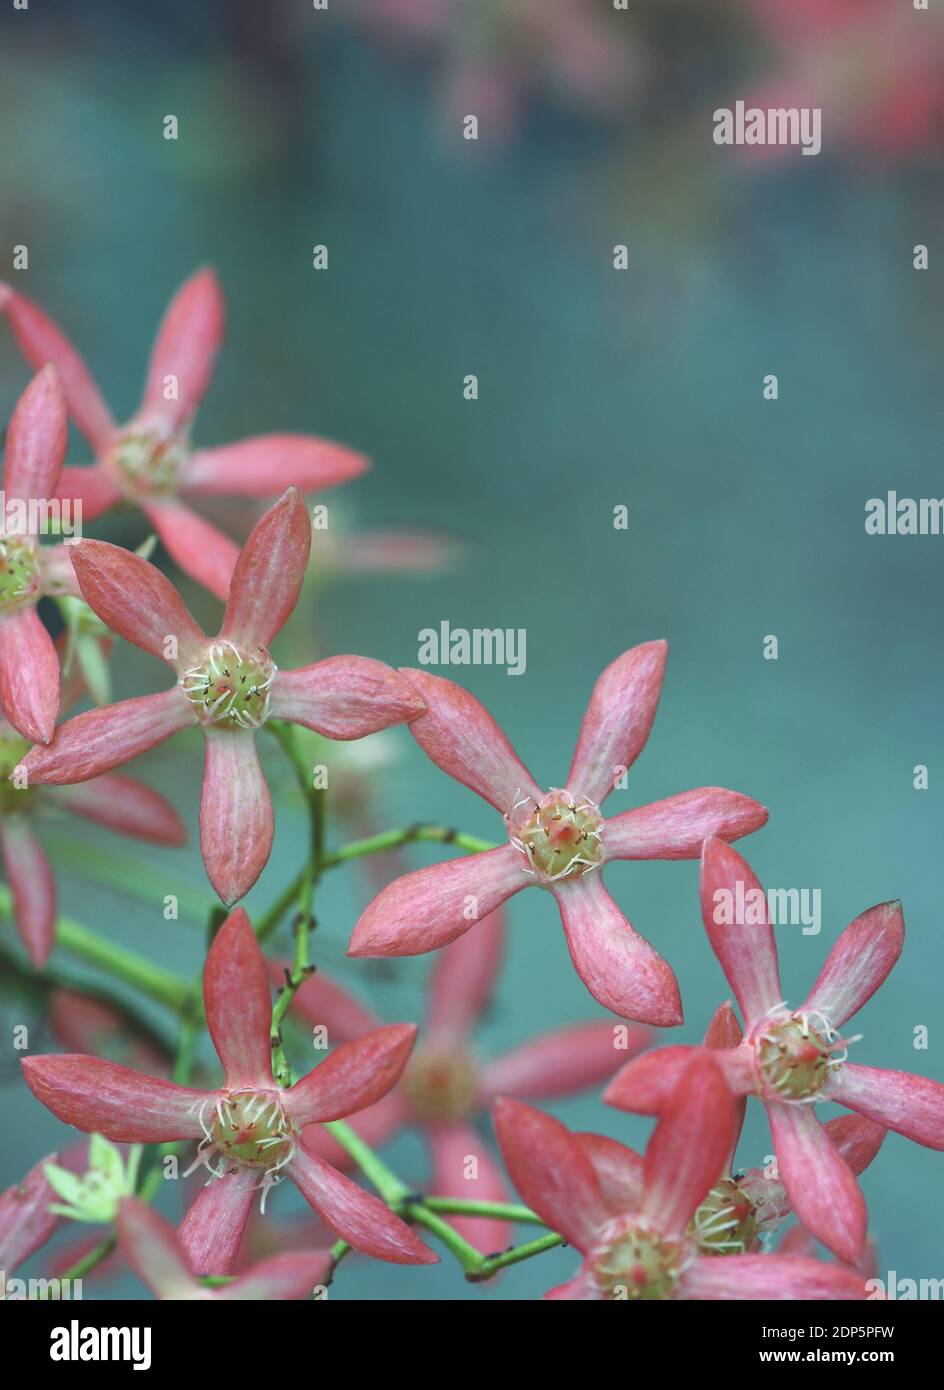 Australian Christmas nature background with copy space. Close up of star shaped pink red sepals of the New South Wales Christmas Bush, Ceratopetalum Stock Photo